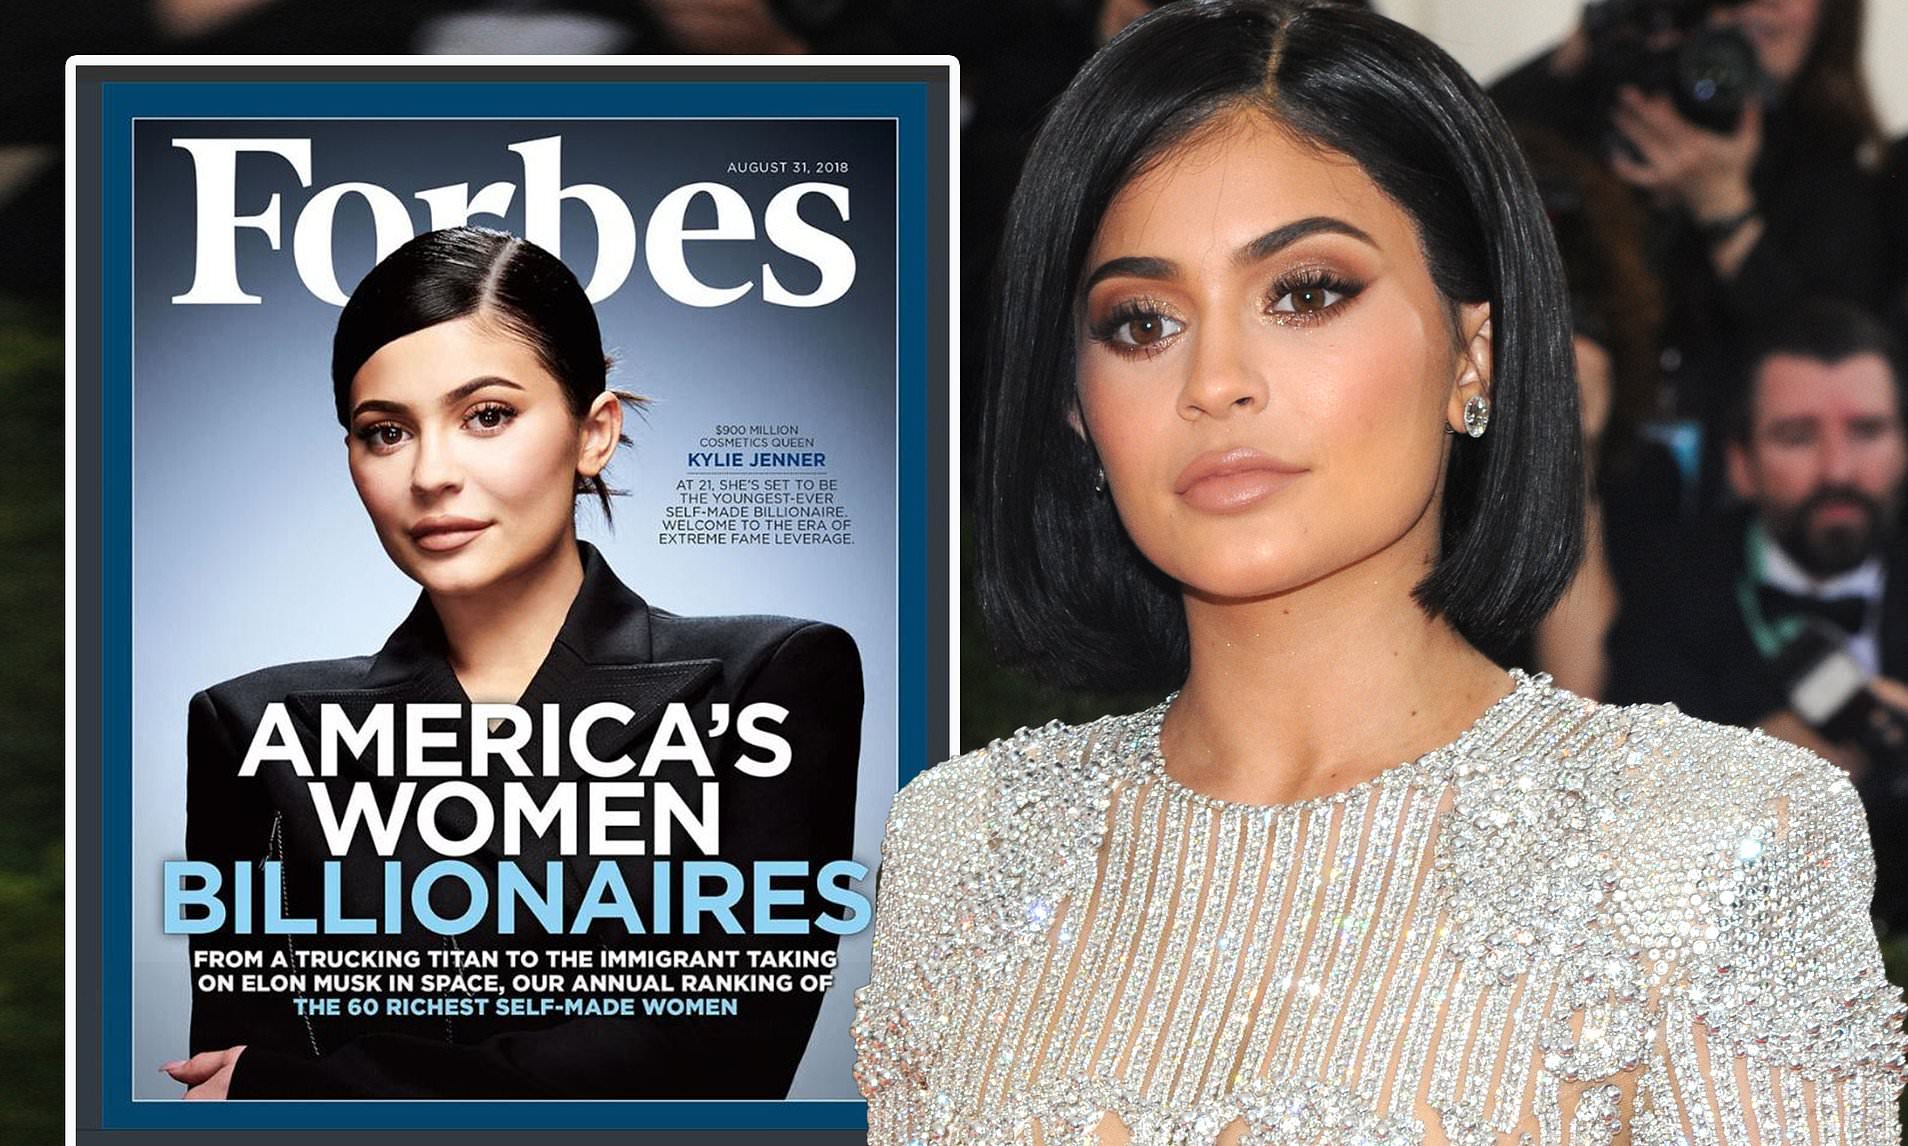 Inside Kylie Jenner's Net Worth And The Forbes Billionaire List's Web Of Lies Controversy